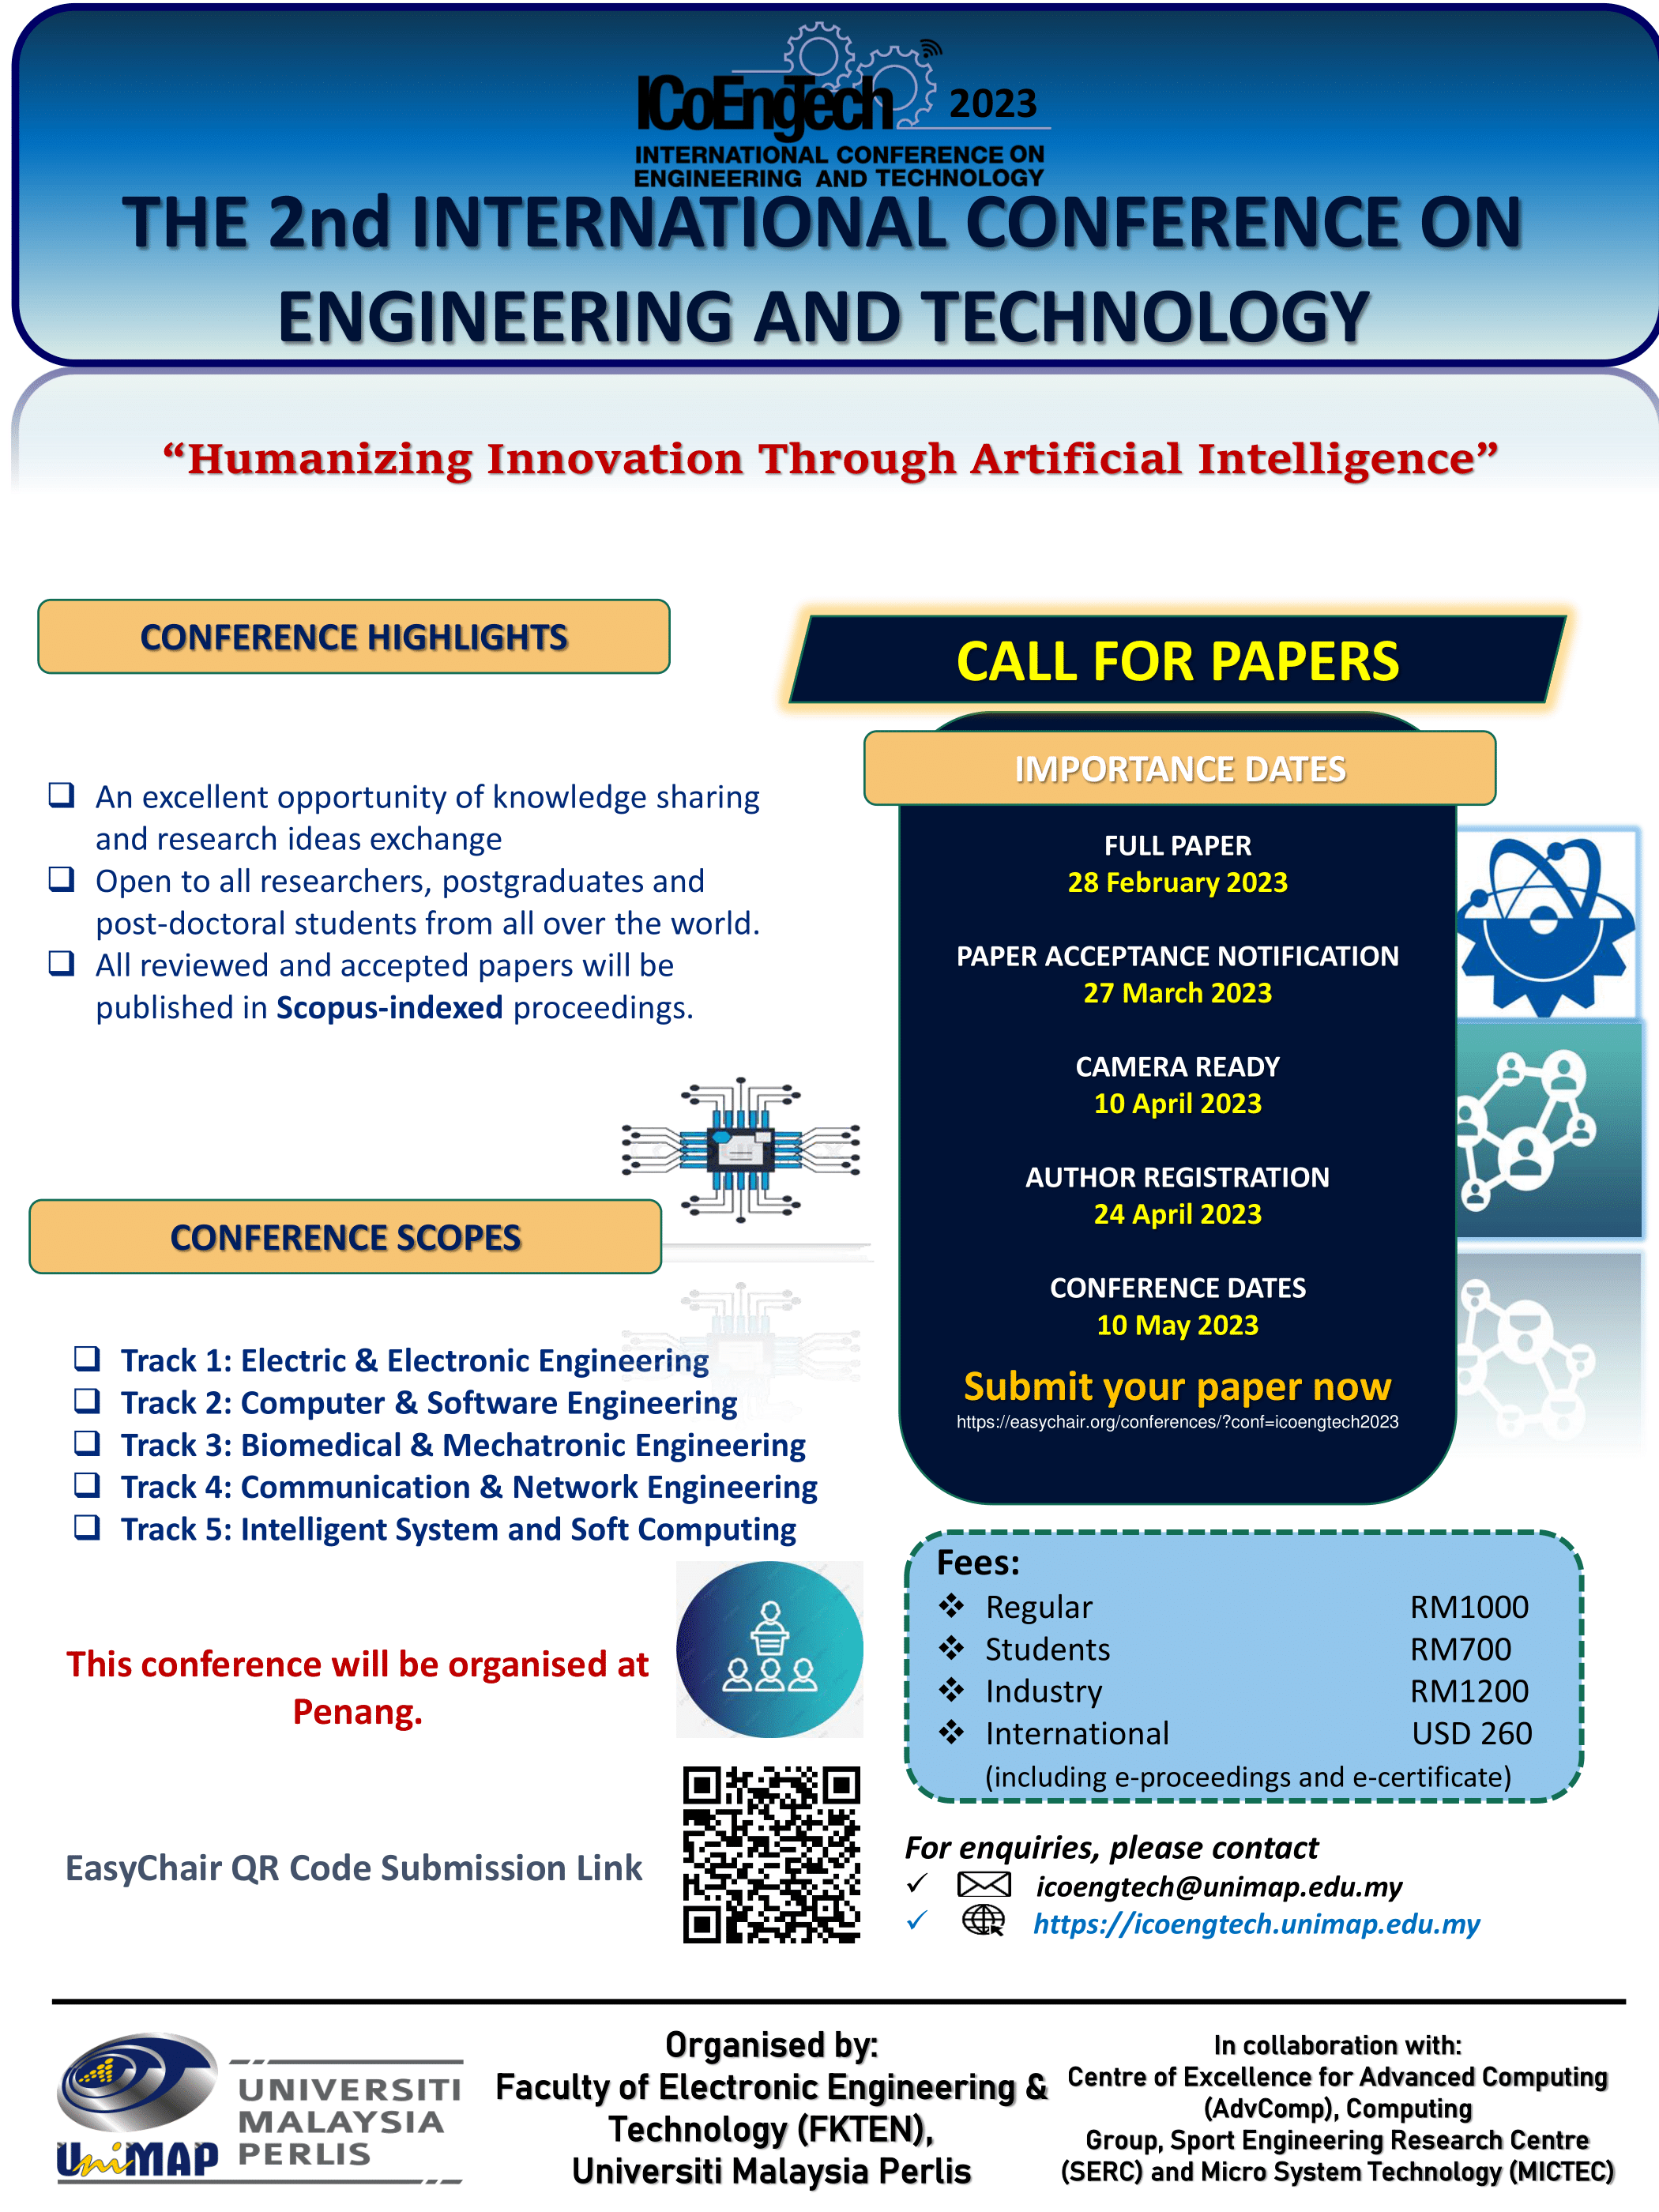 2nd International Conference of Engineering and Technology 2023 (ICoEngTech 2023)